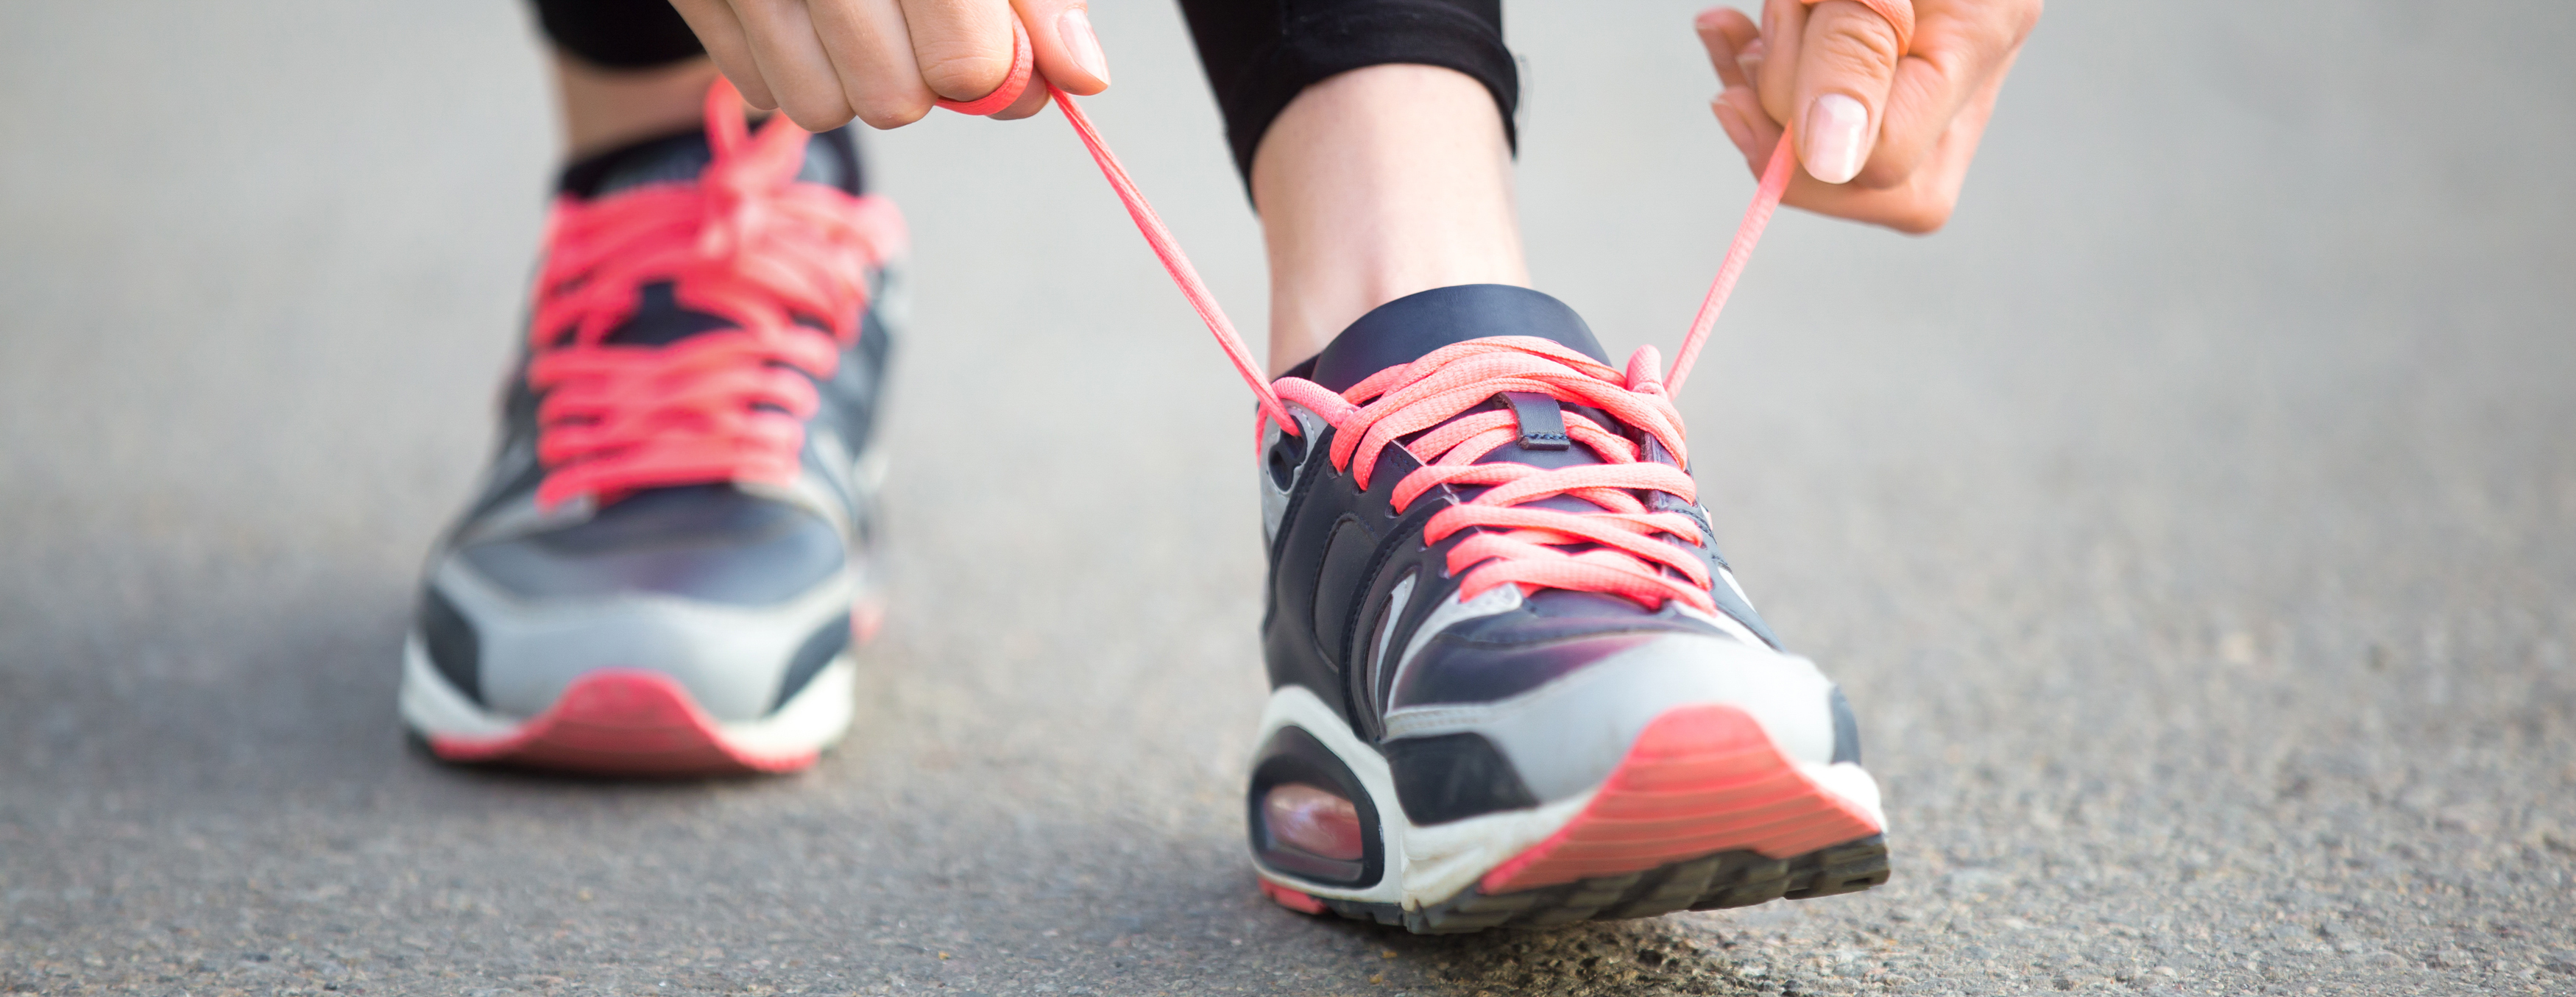 ways to lace running shoes